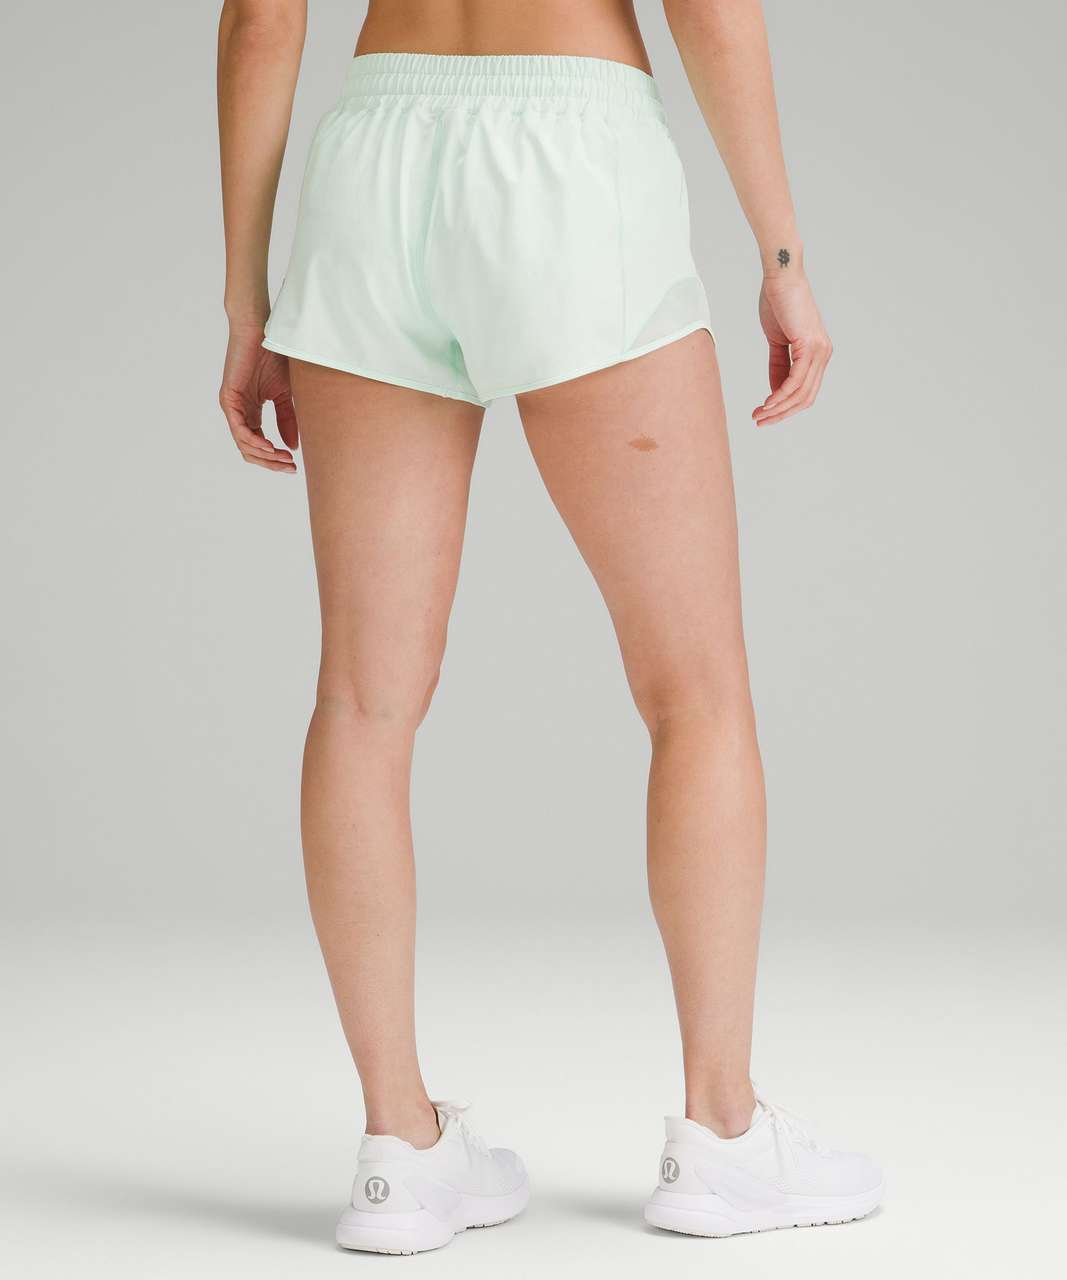 Hotty Hot Low-Rise Lined Short 2.5